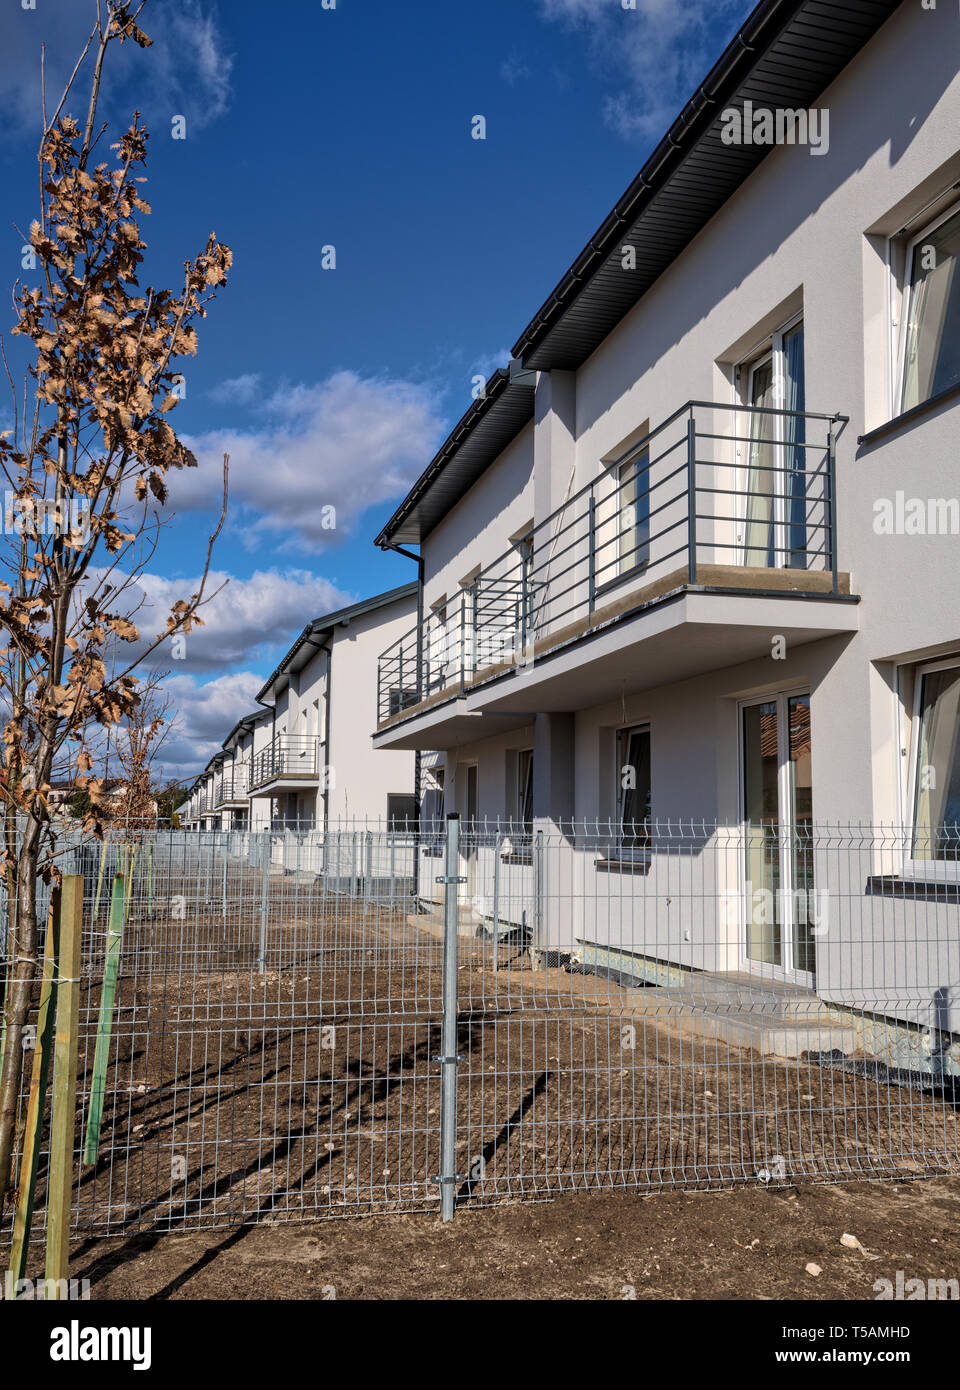 New residential buildings in Poland. HDR - high dynamic range Stock Photo